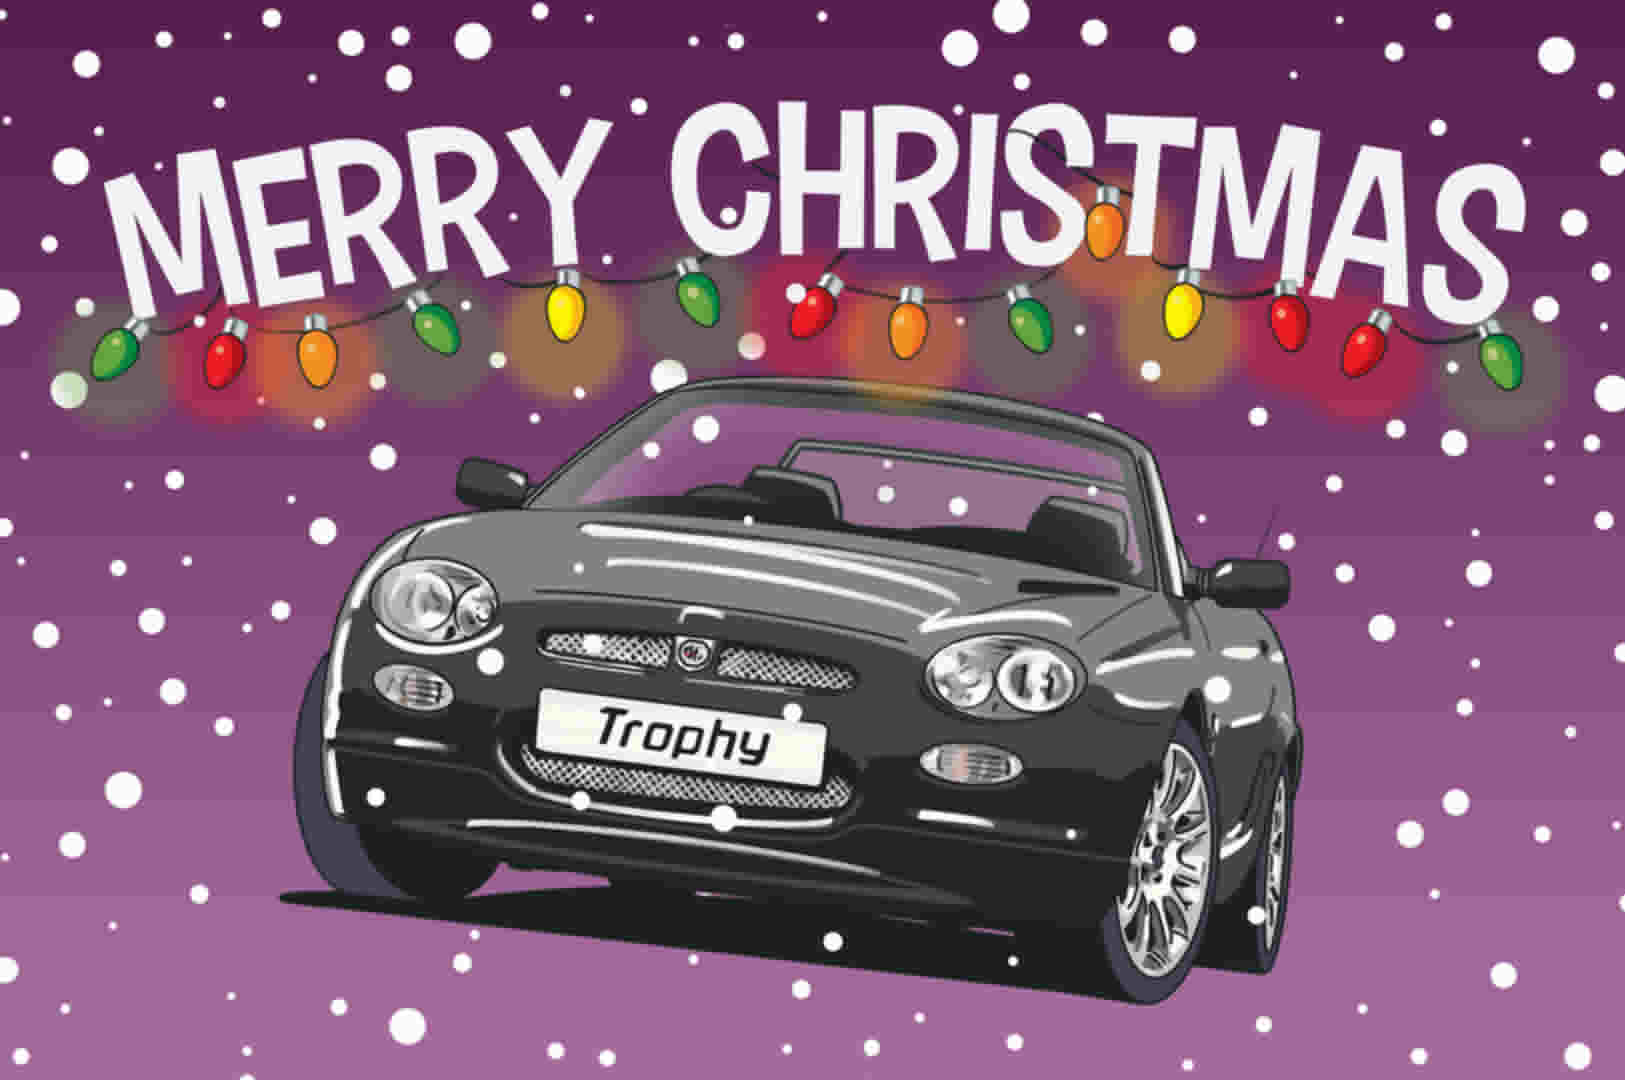 Anthracite Black MGF Trophy Christmas Card